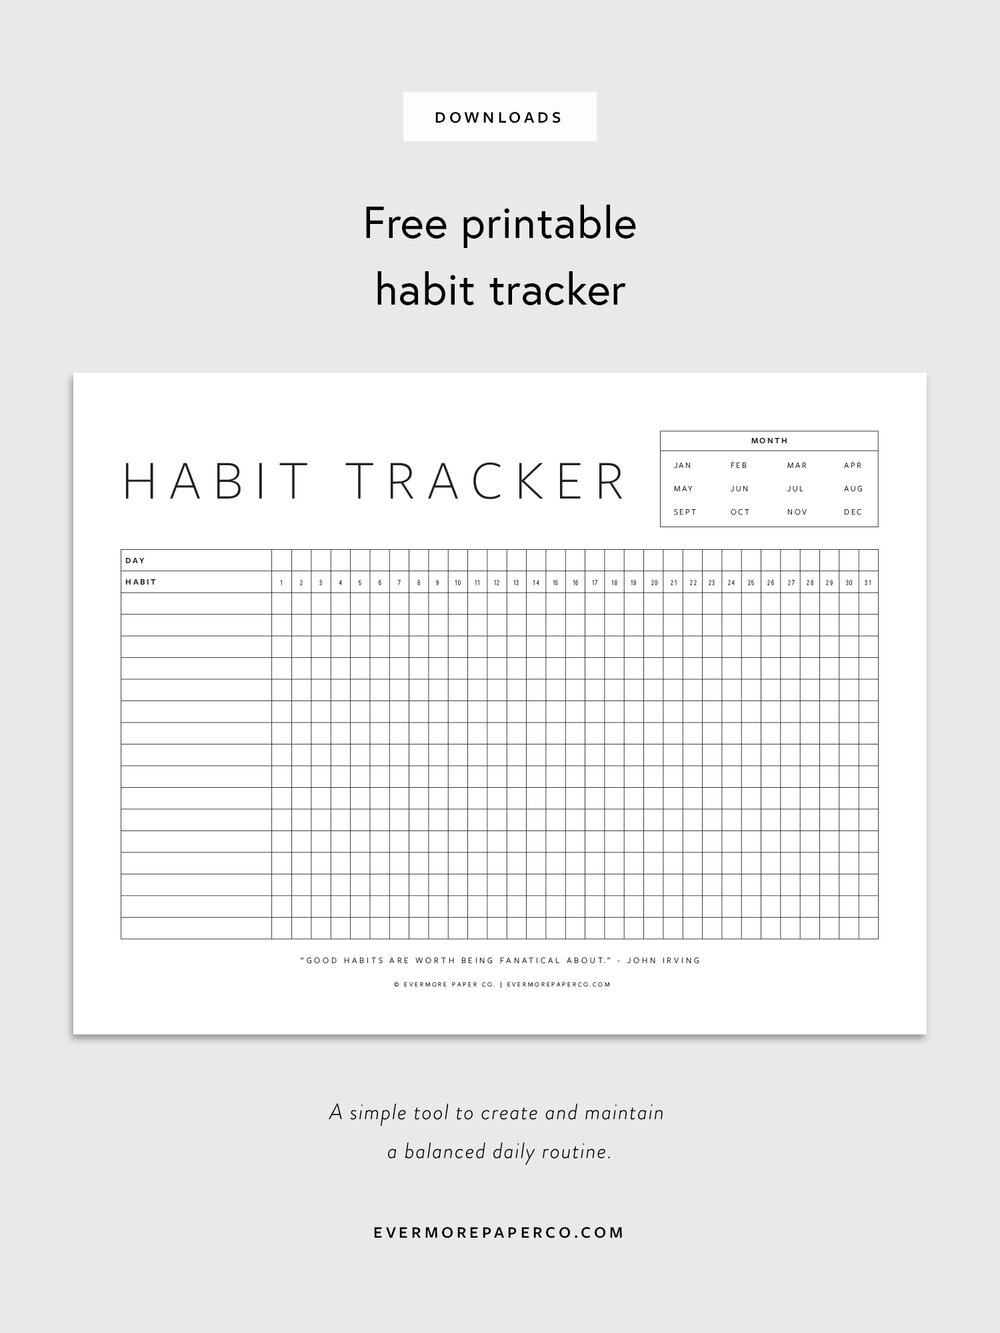 Free Printable Habit Tracker Evermore Paper Co